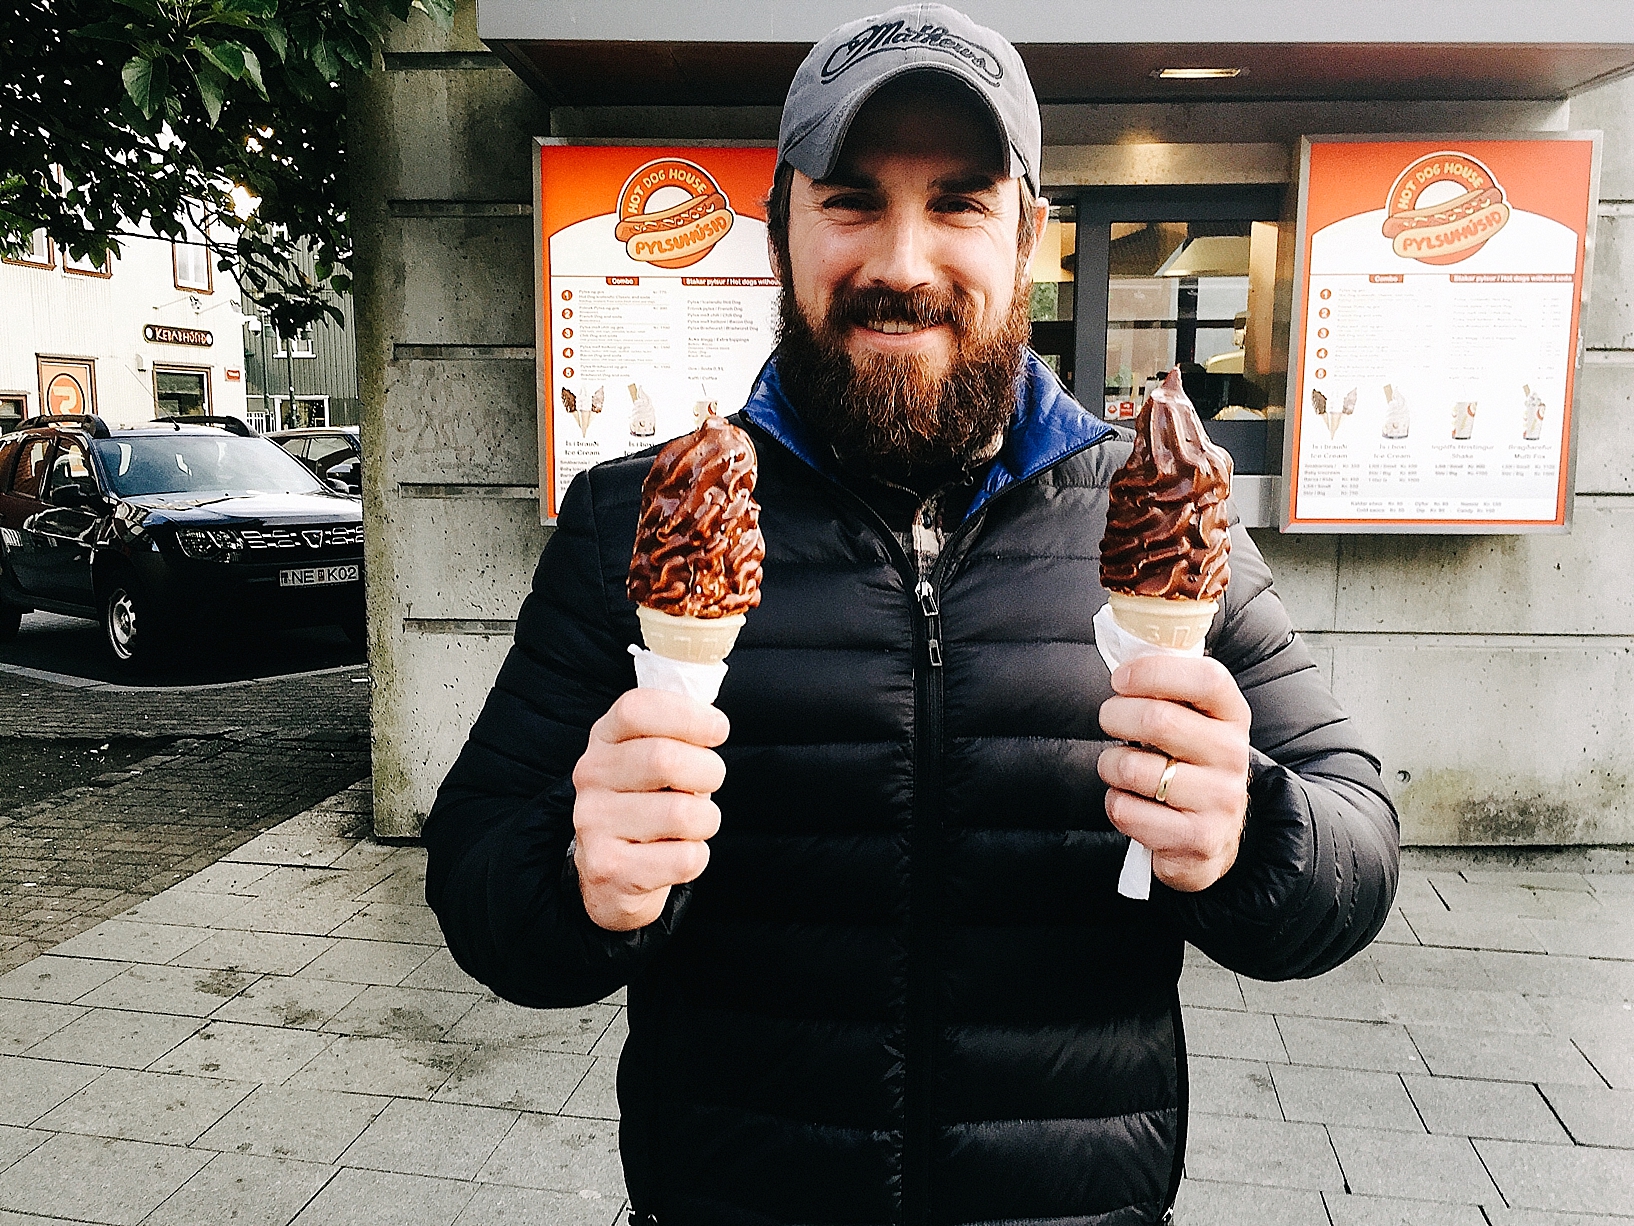 man holding chocolate dipped ice cream cones in Reykjavik Iceland